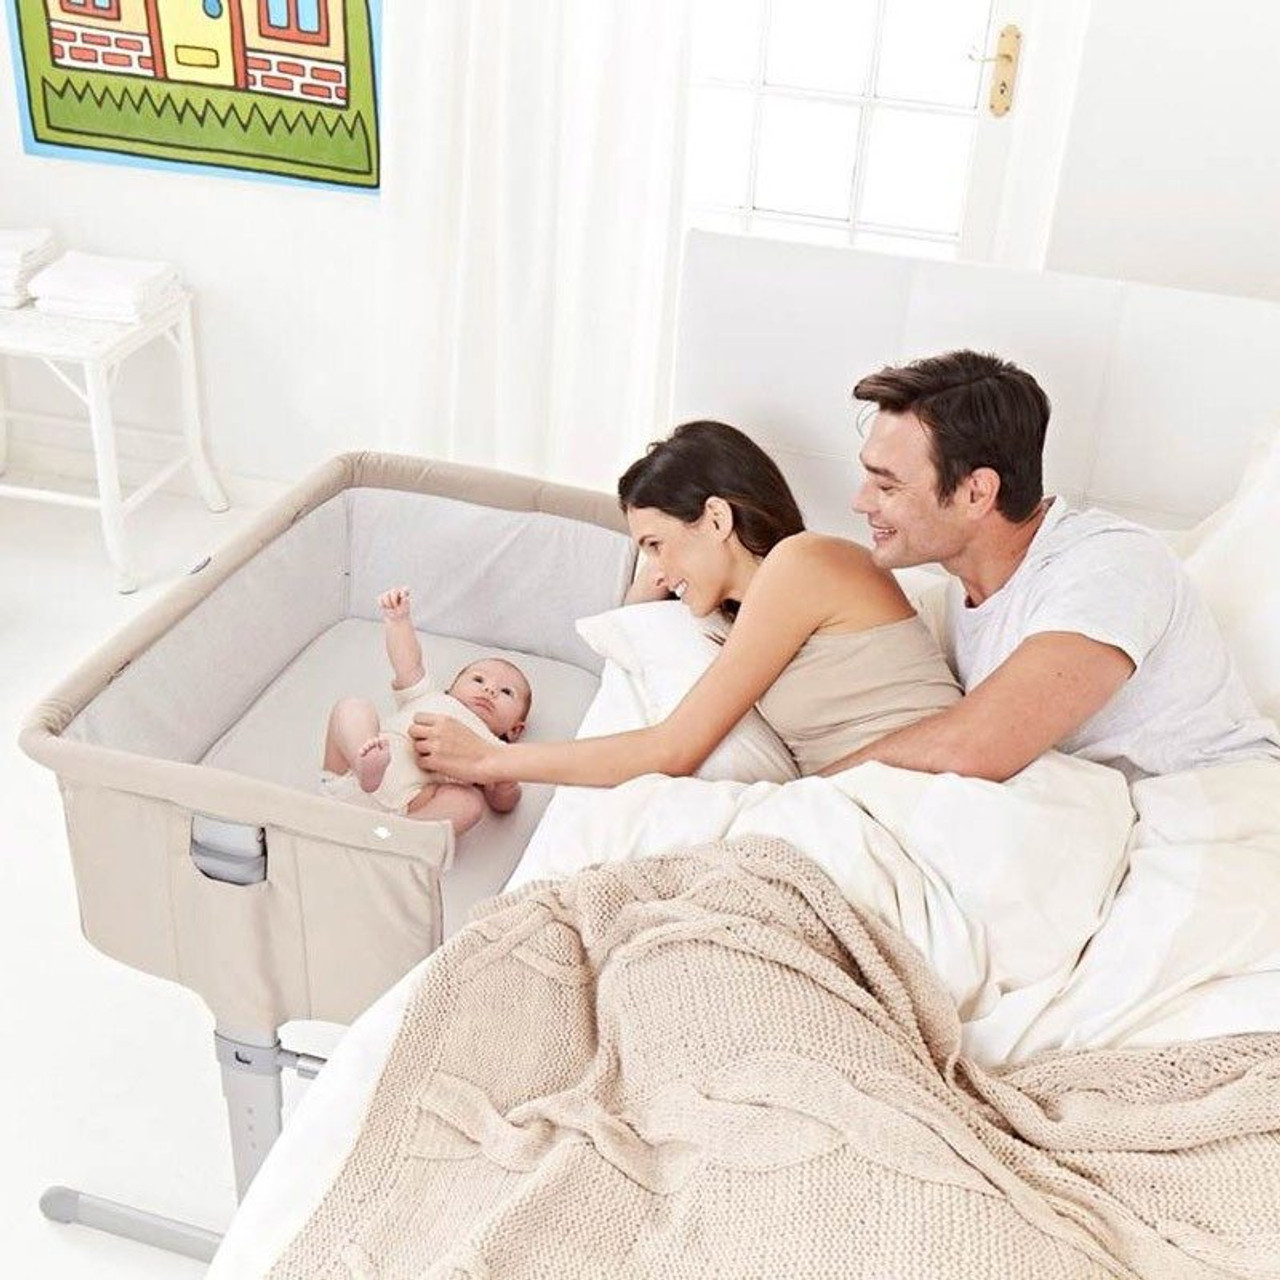 chicco bedside